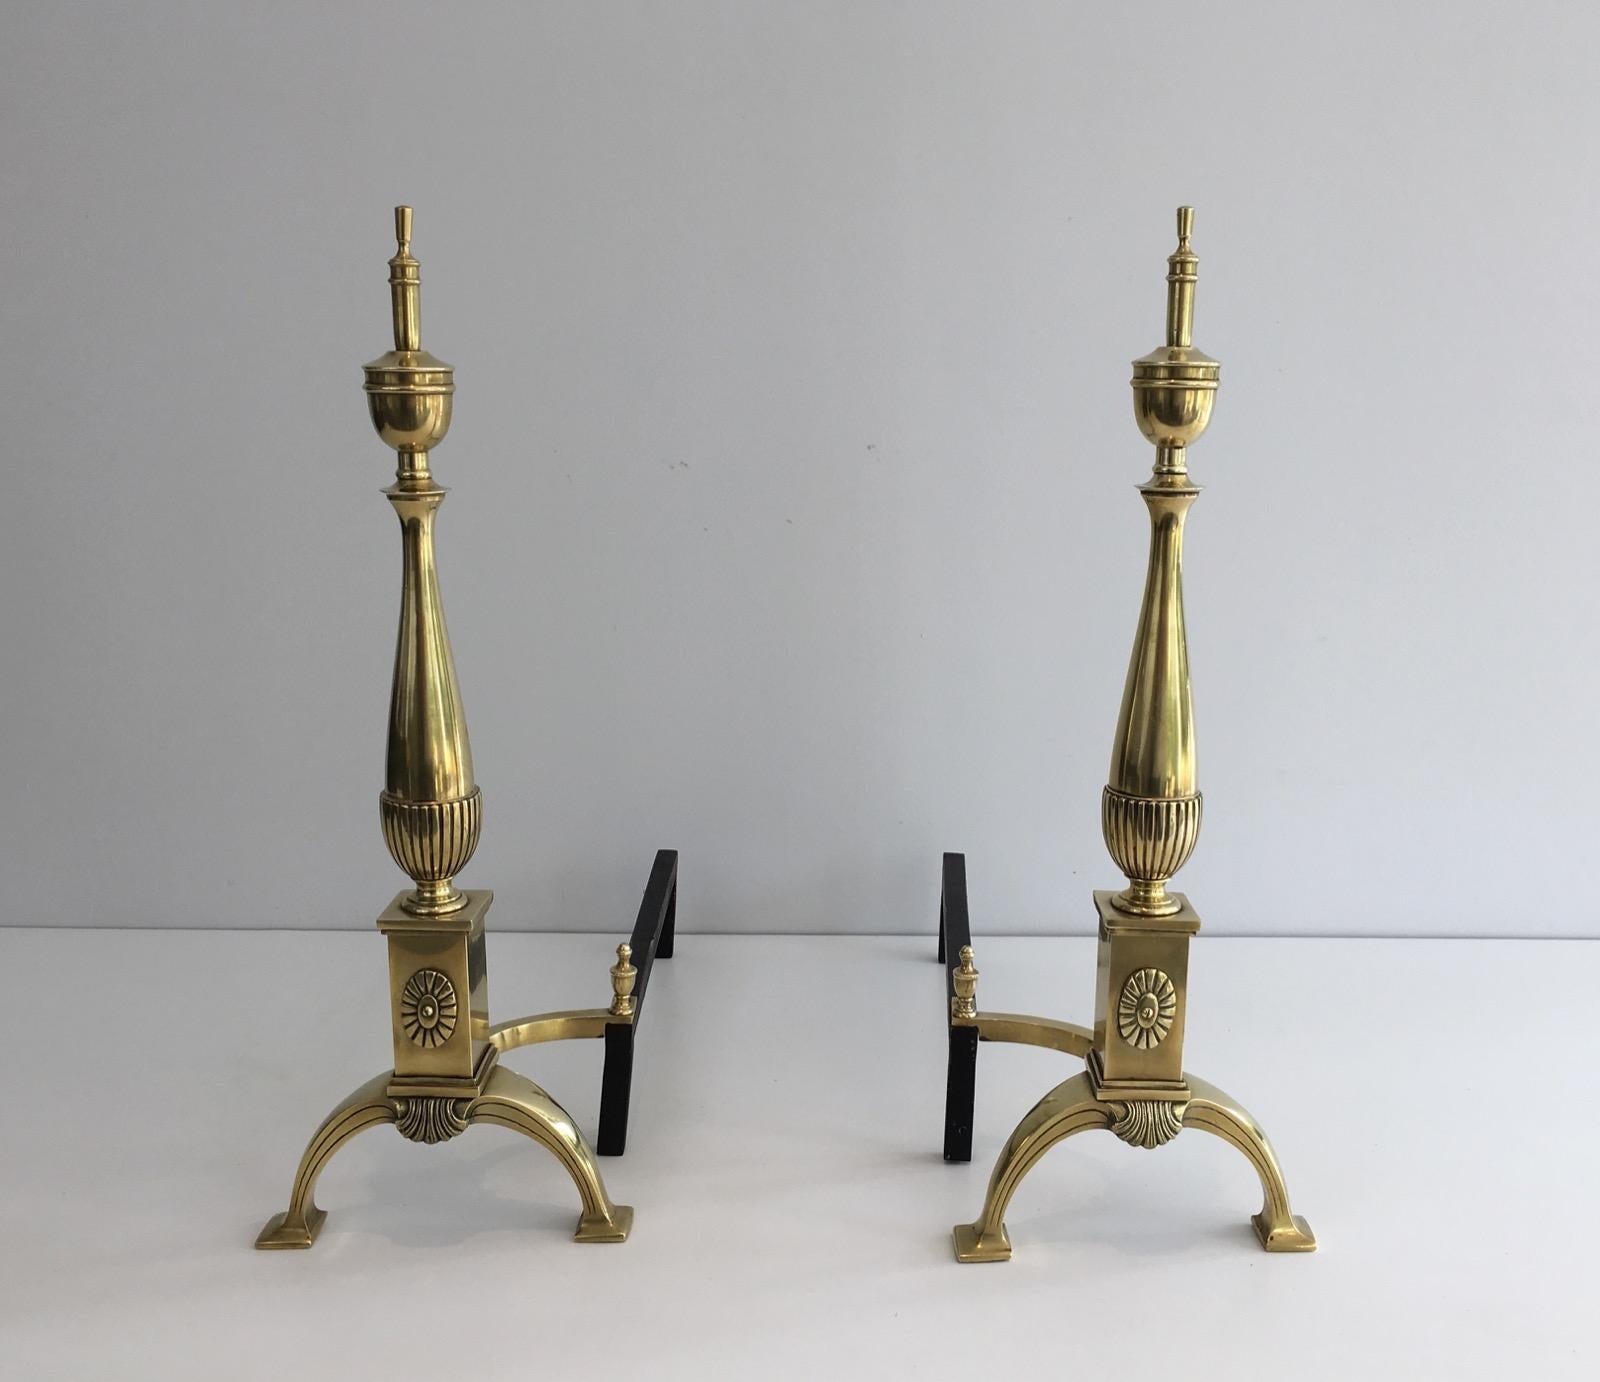 This pair of andirons in the neoclassical style are made of brass and wrought Iron. They are French, circa 1940.